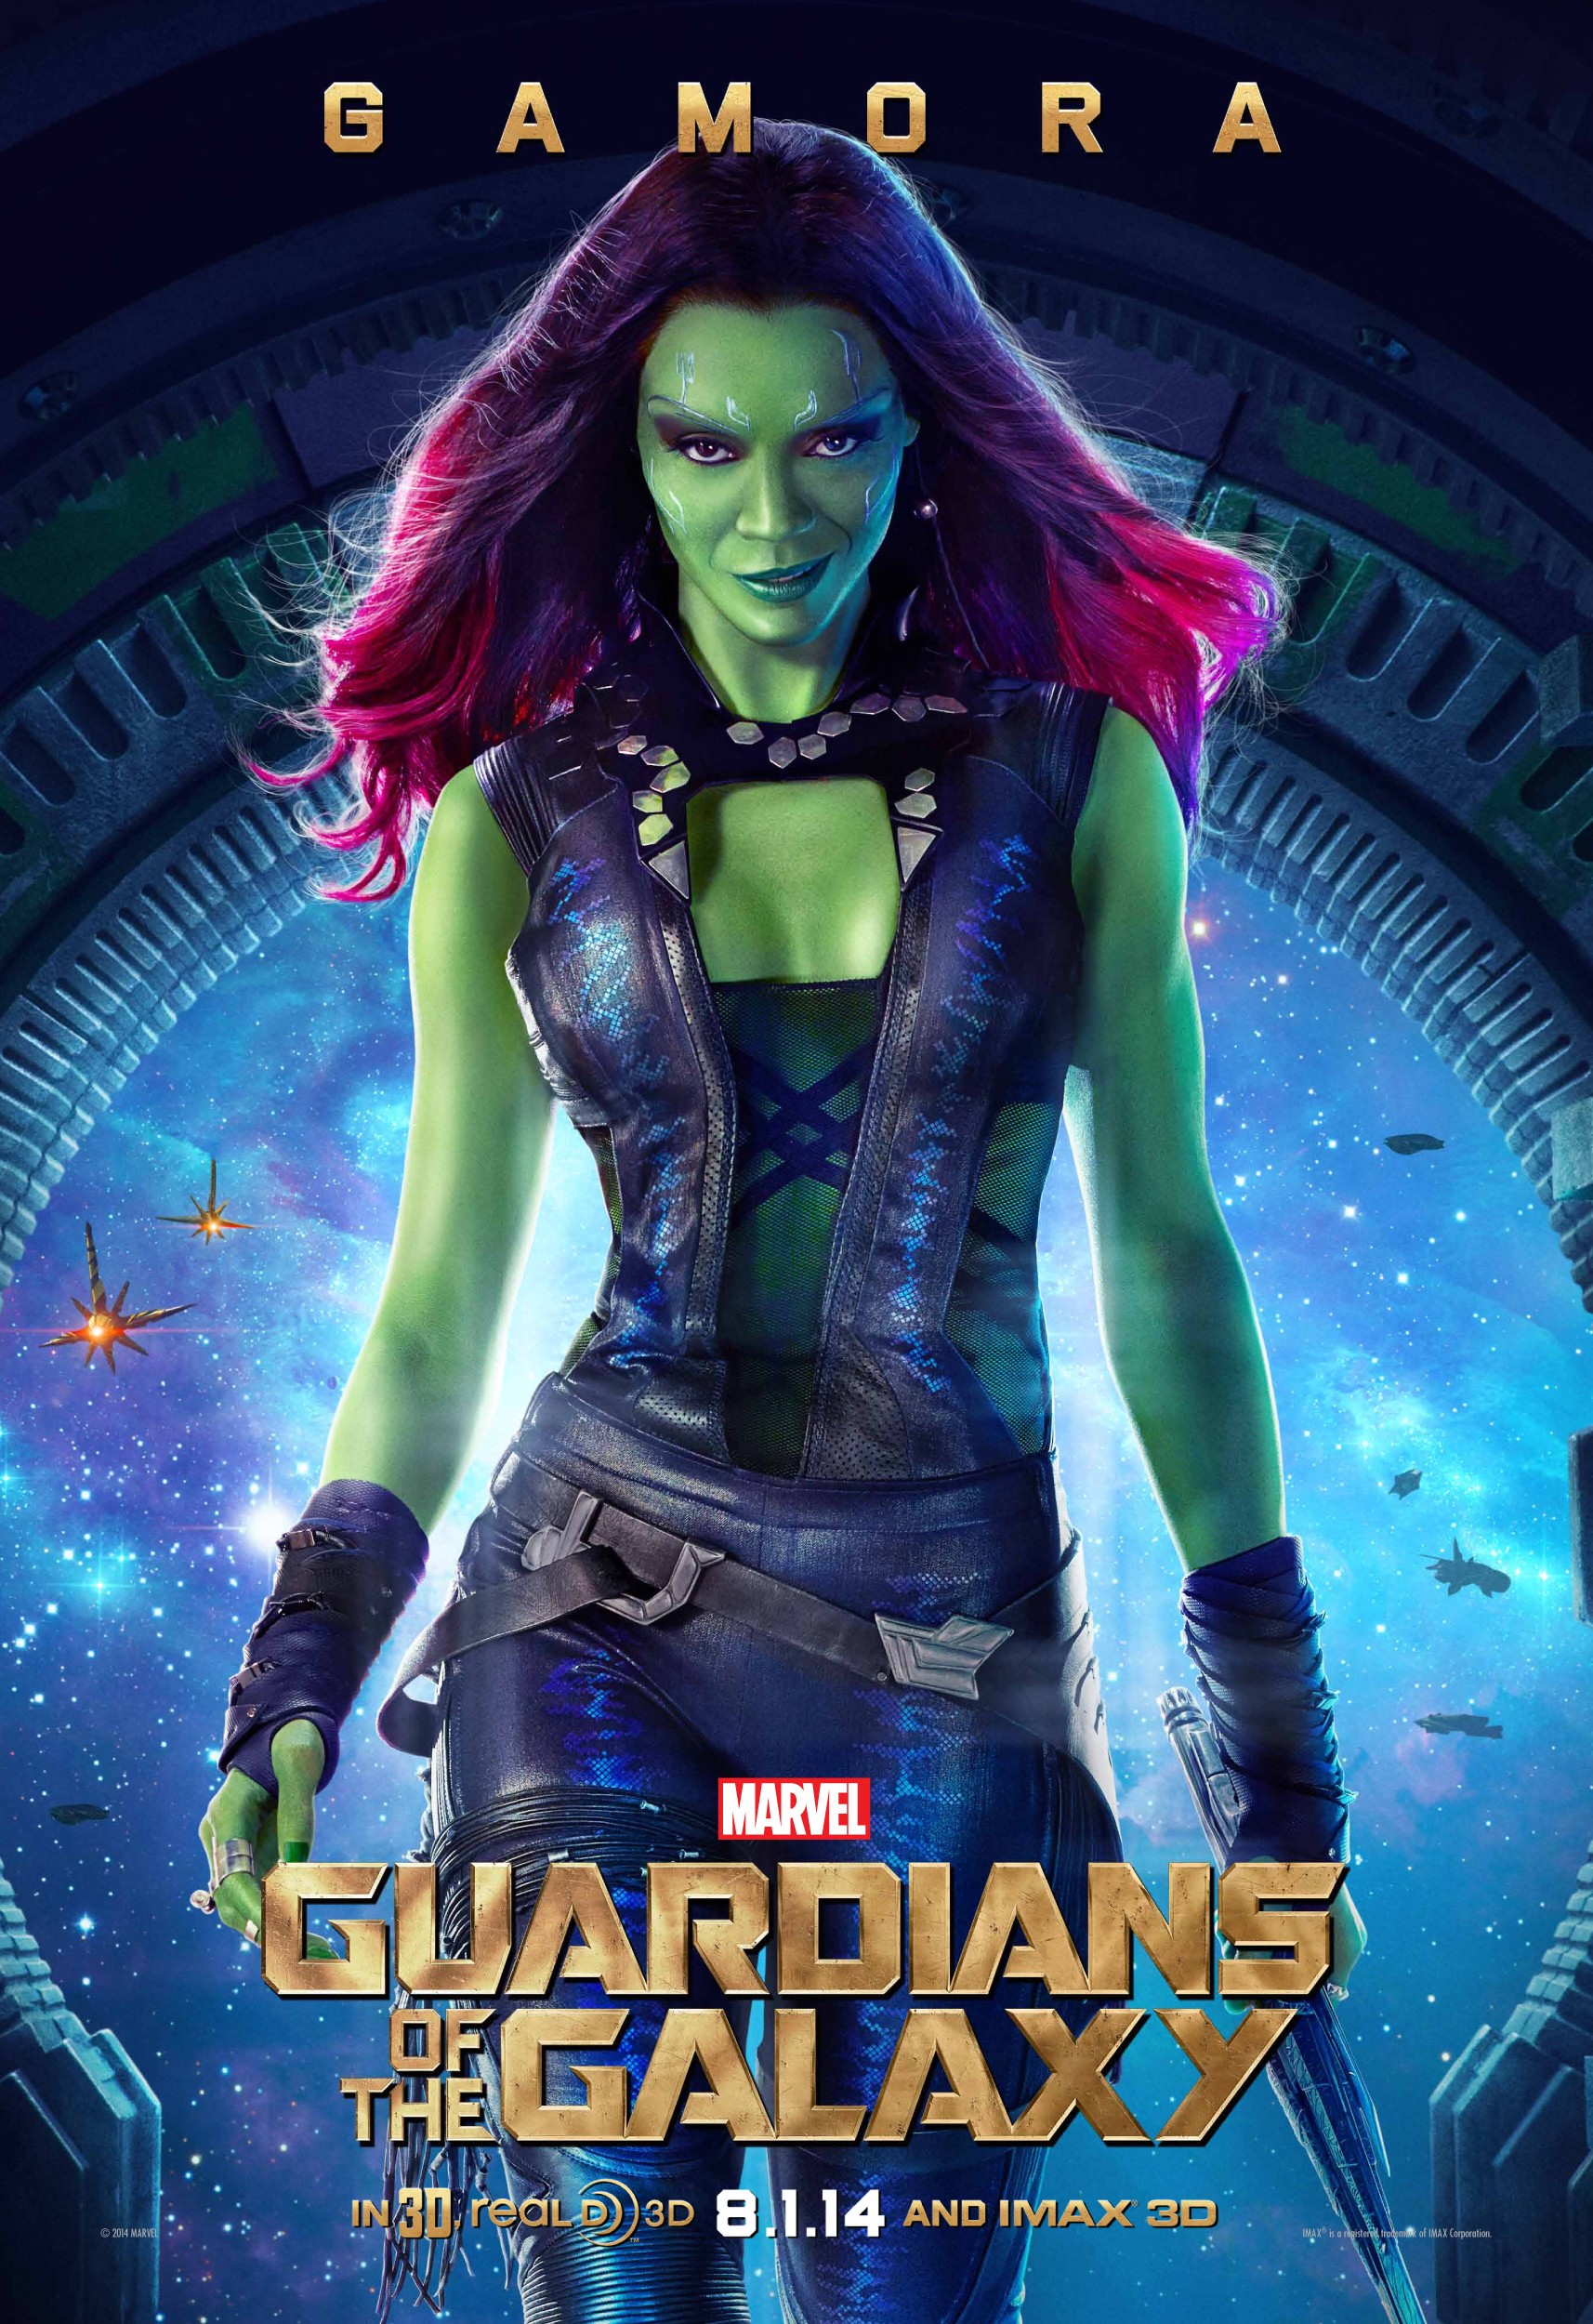 Mega Sized Movie Poster Image for Guardians of the Galaxy (#5 of 23)